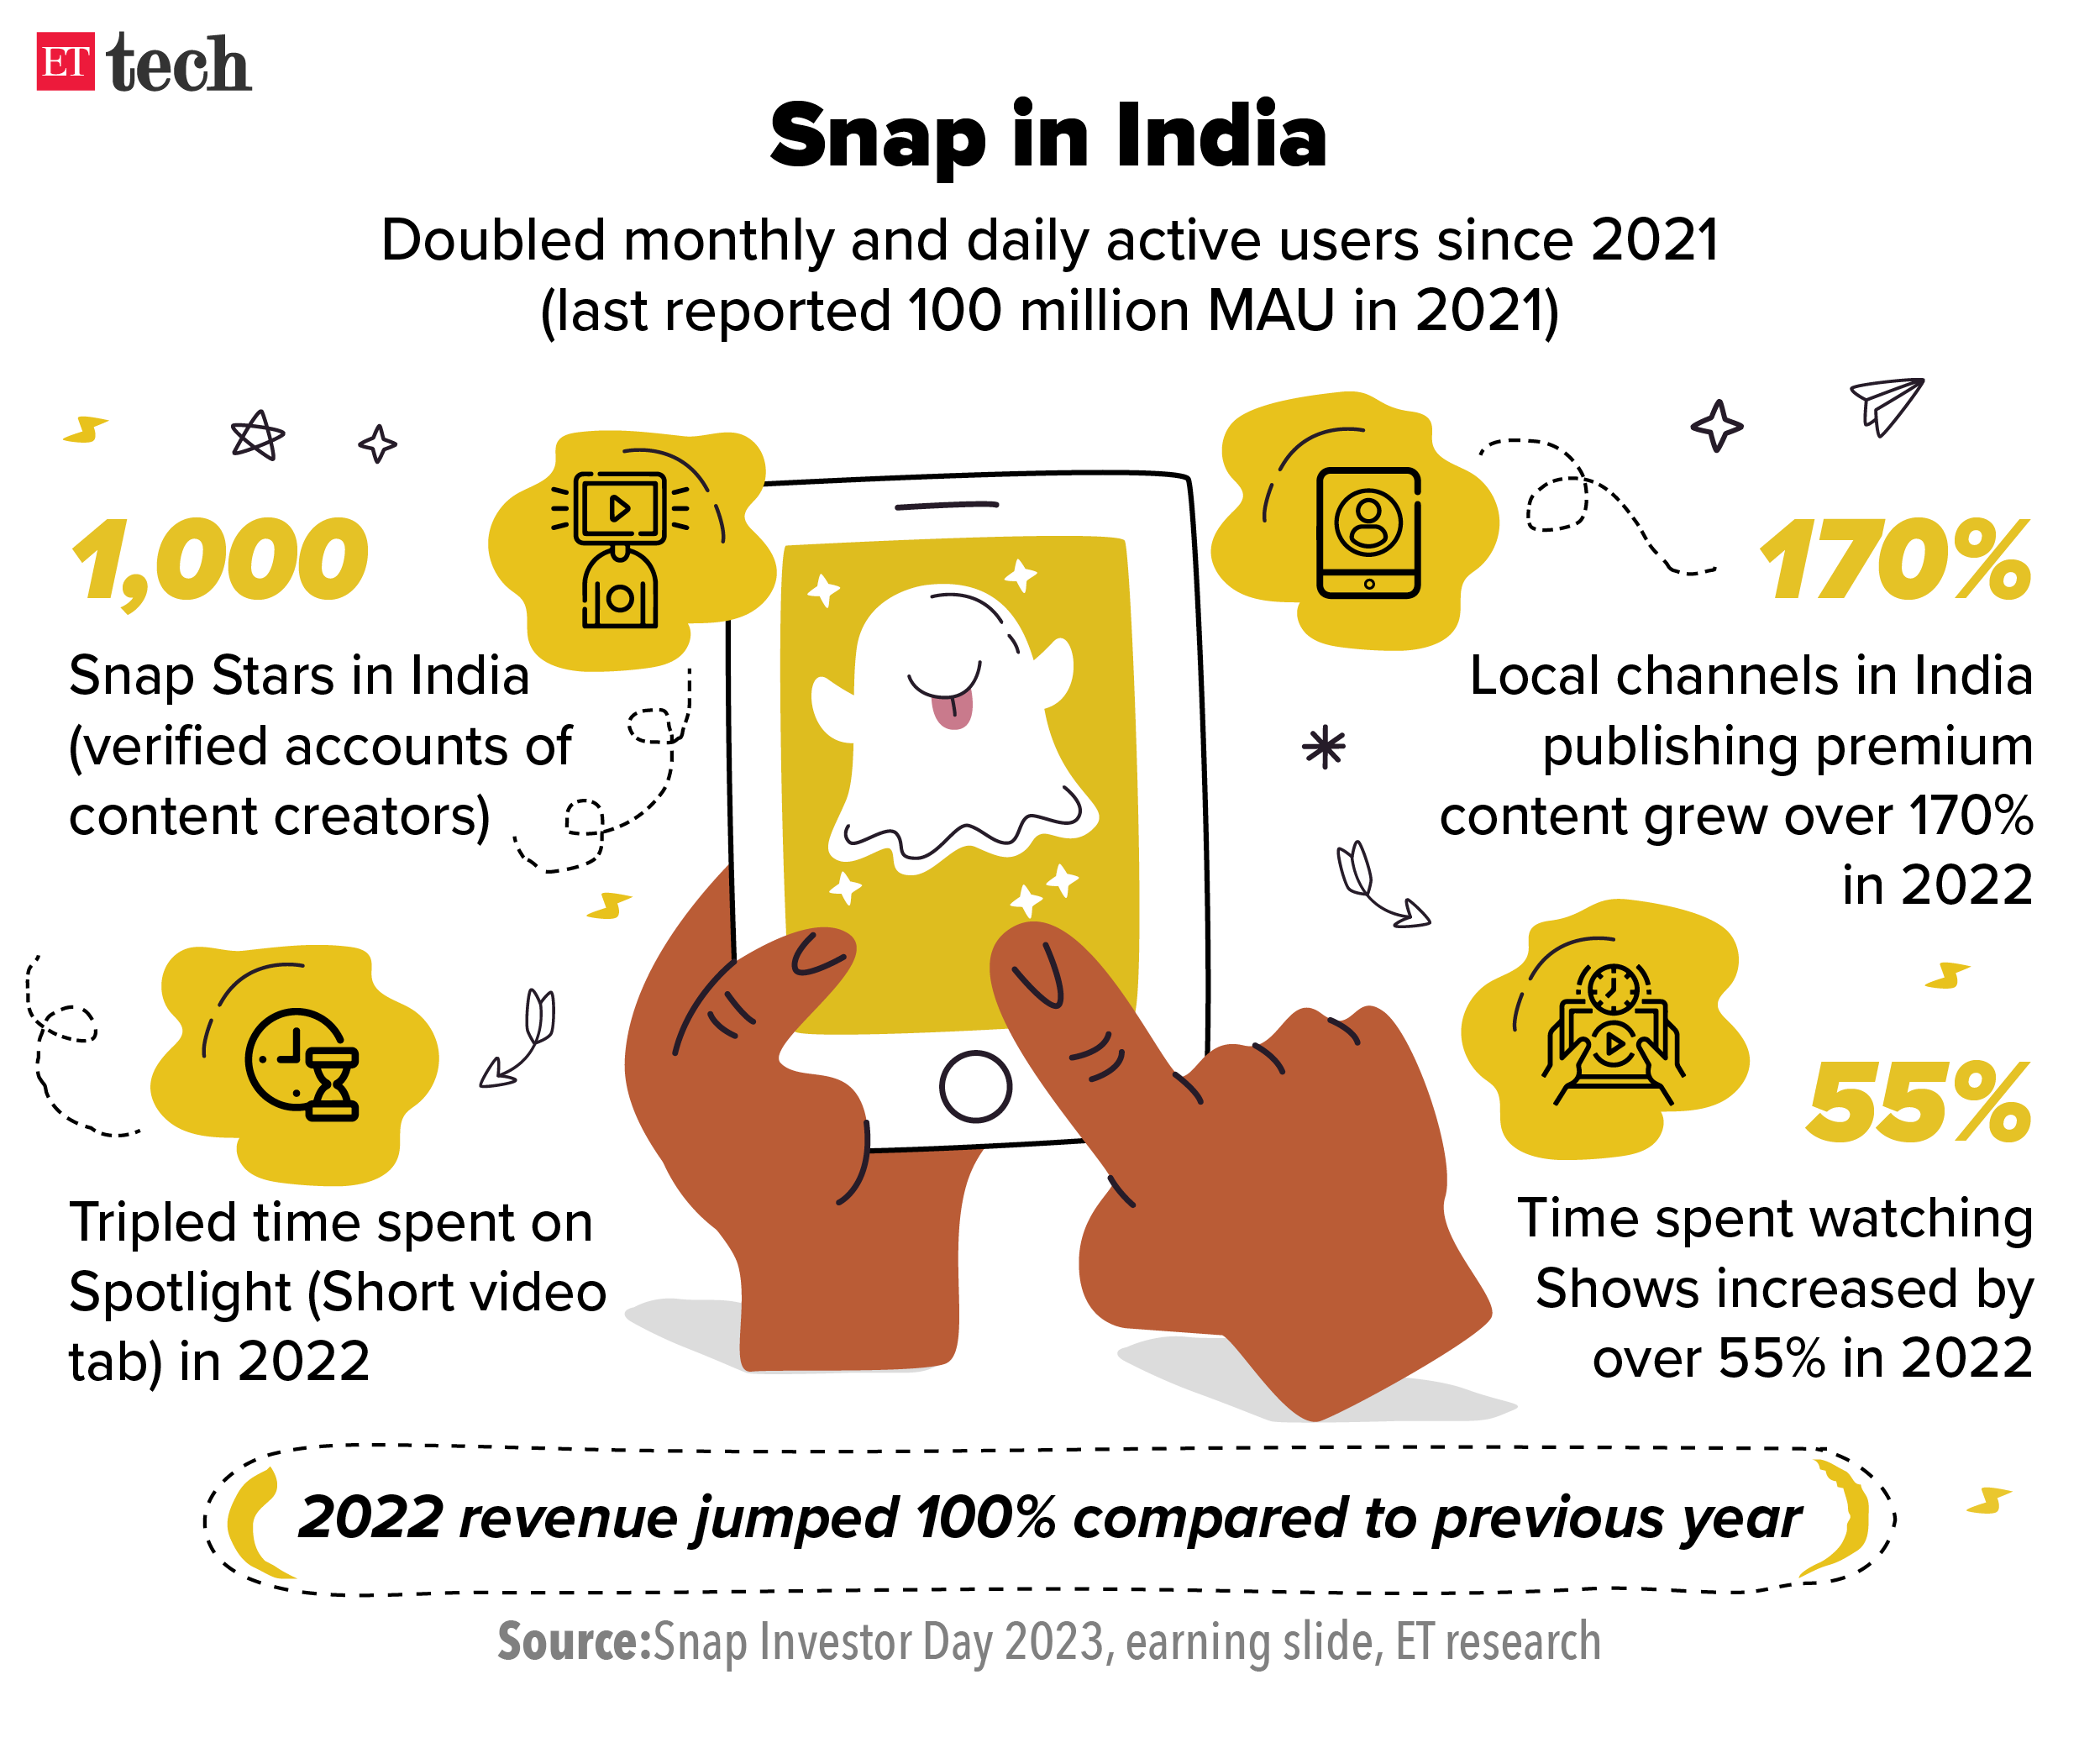 Snap in India